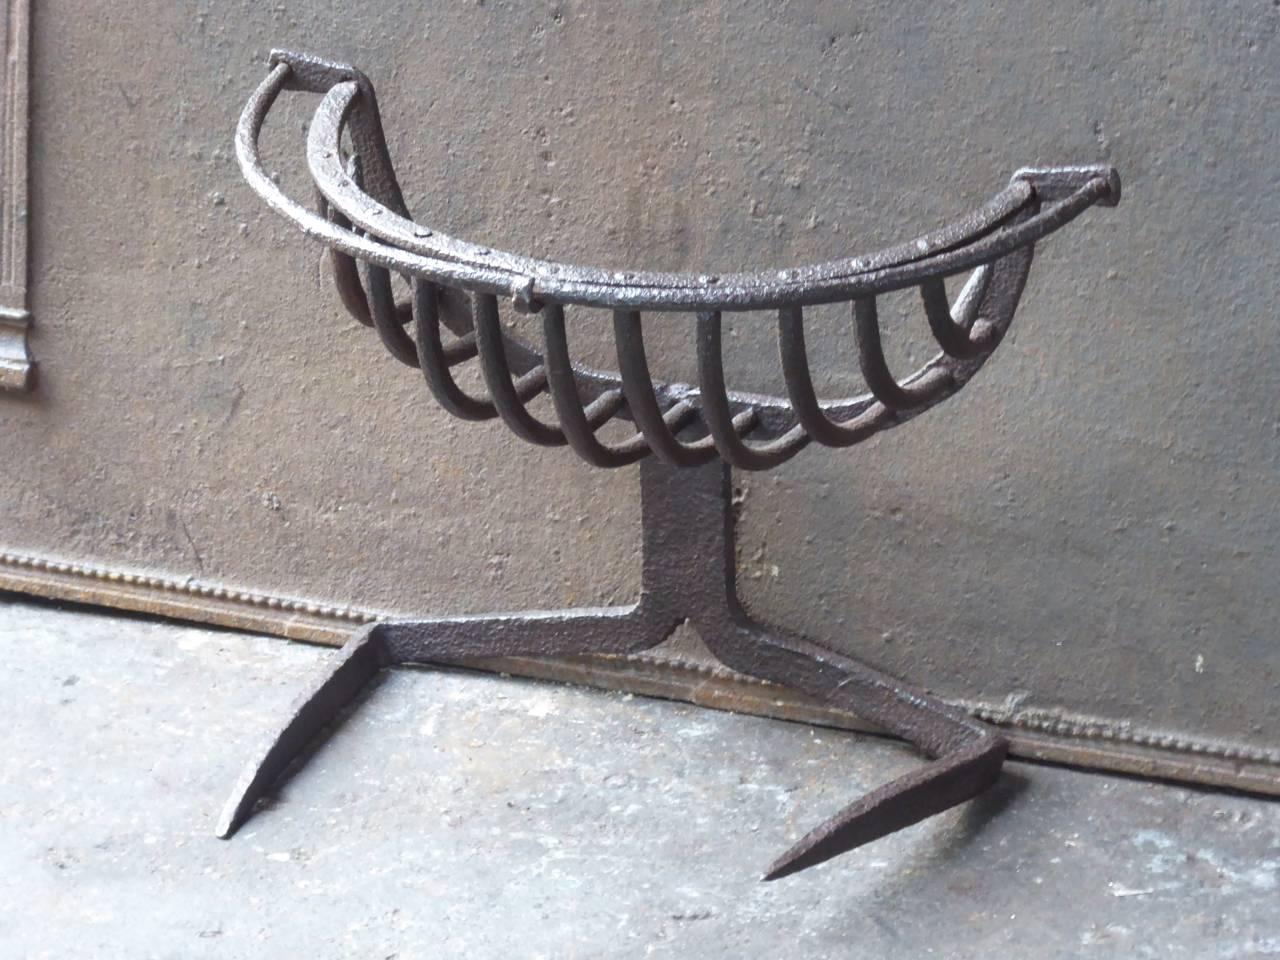 17th century Dutch fire grate made of wrought iron. Gothic period. The grate is in a good condition.

